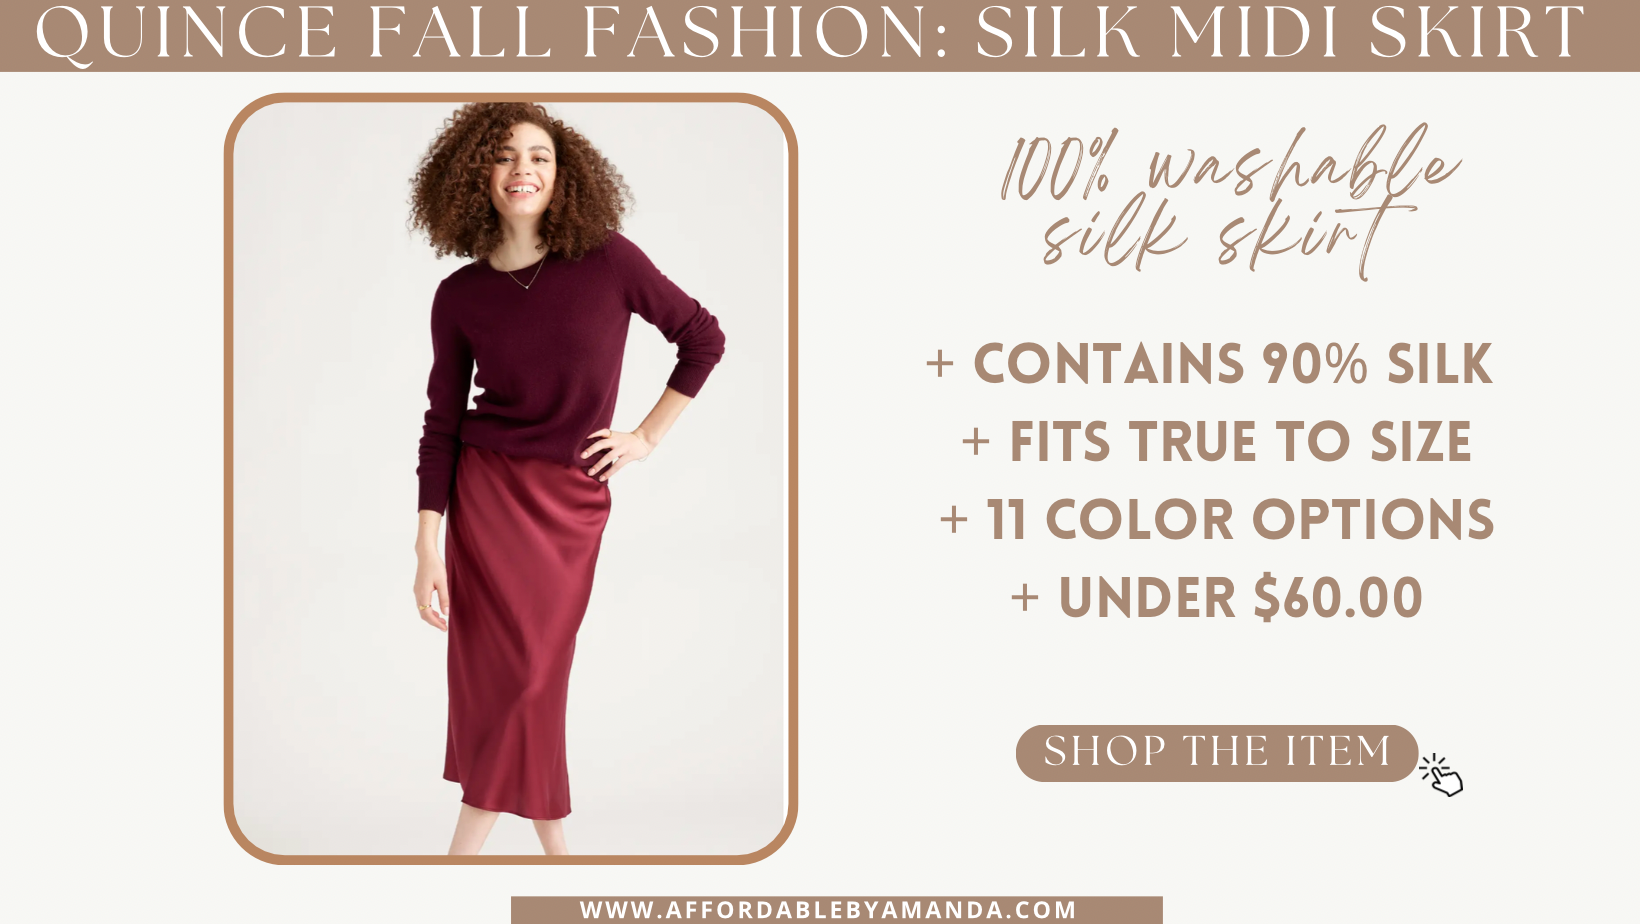 Quince 100% Washable Silk Skirt - Fall Fashion Finds from Quince - Affordable by Amanda